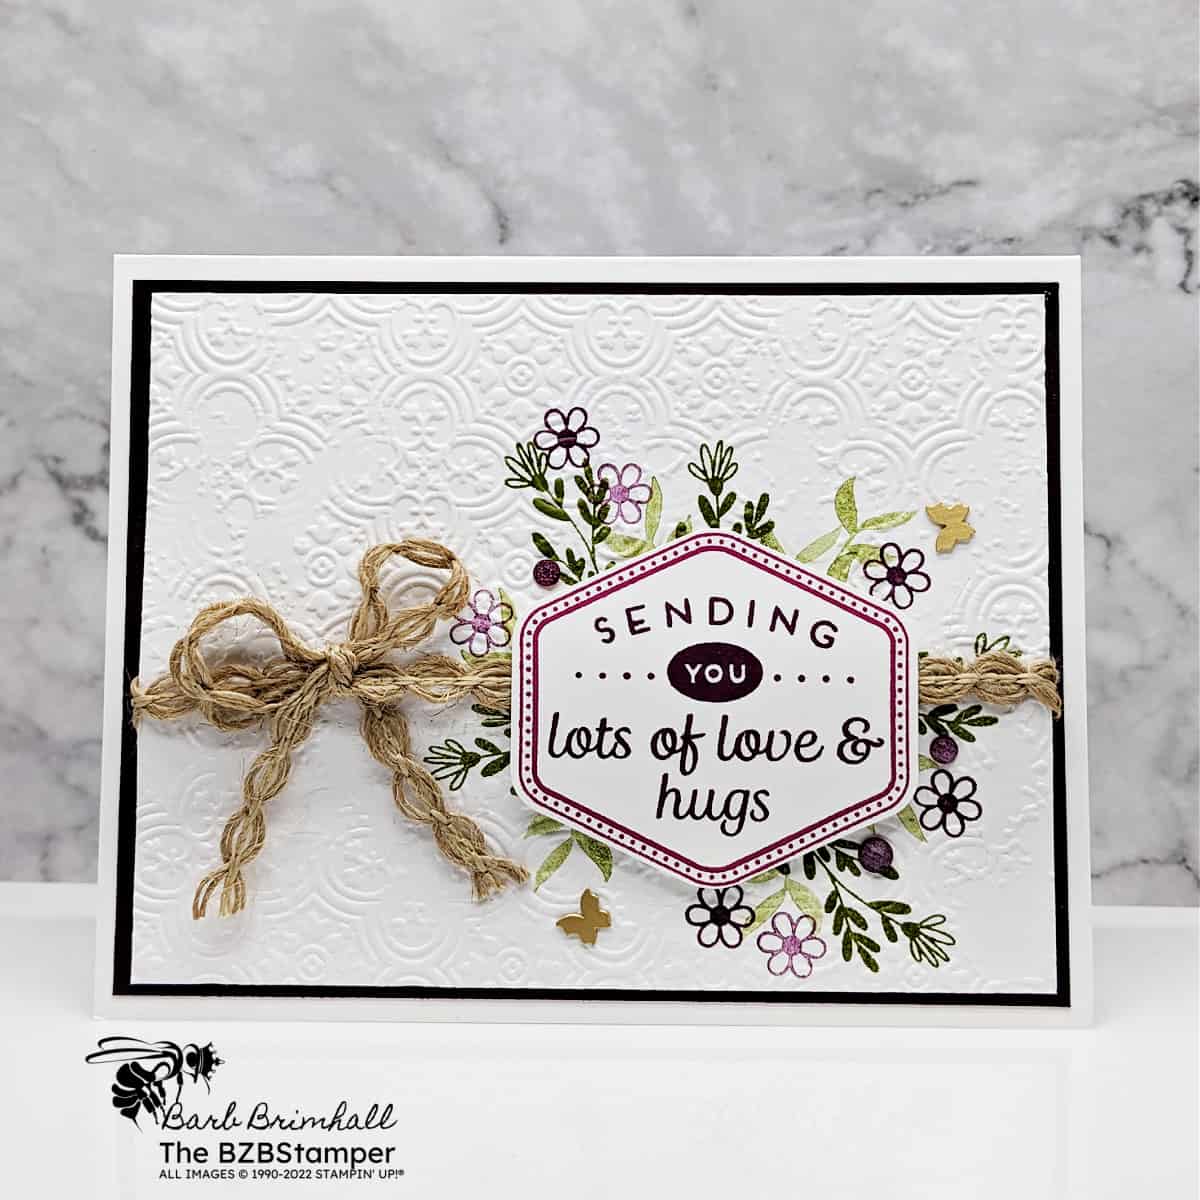 Handmade Thinking Of You Card Tutorial featuring purple flowers and green foliage, with an embossed background.  Sentiment is "sending you lots of love & hugs."